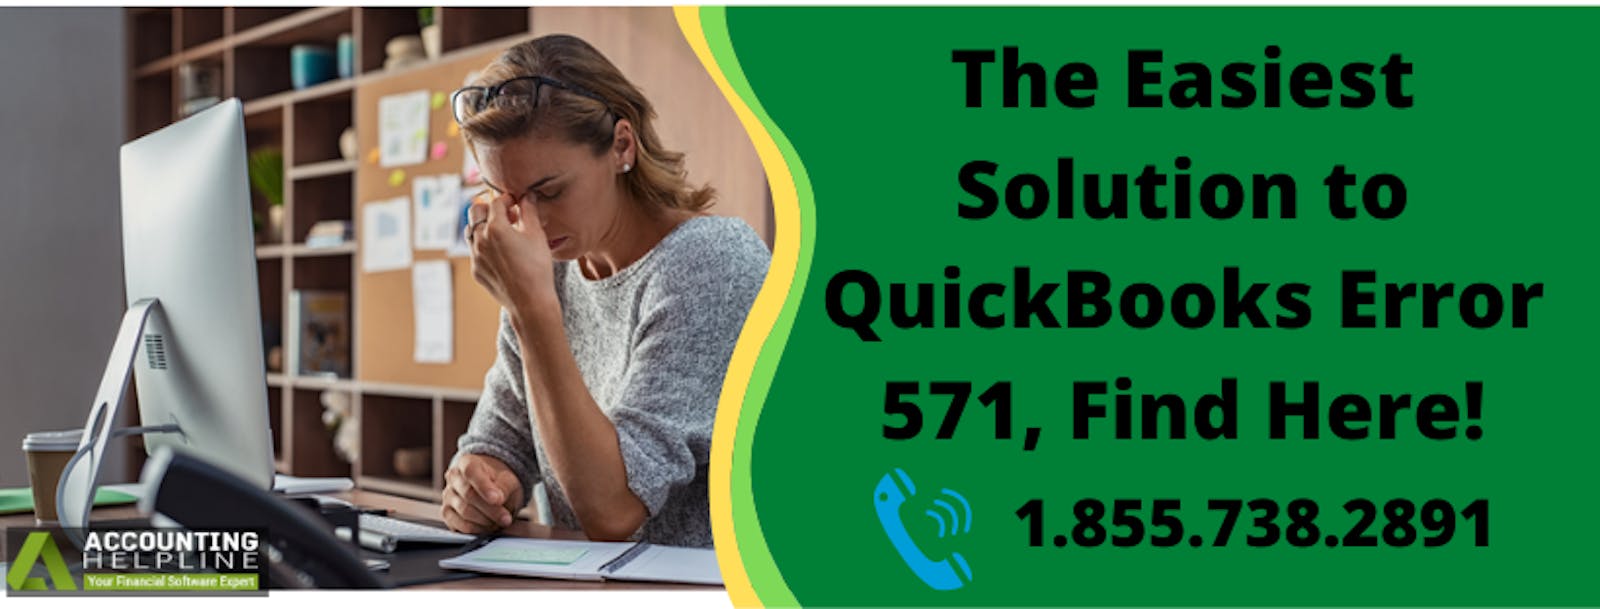 The Easiest Solution to QuickBooks Error 571, Find Here!